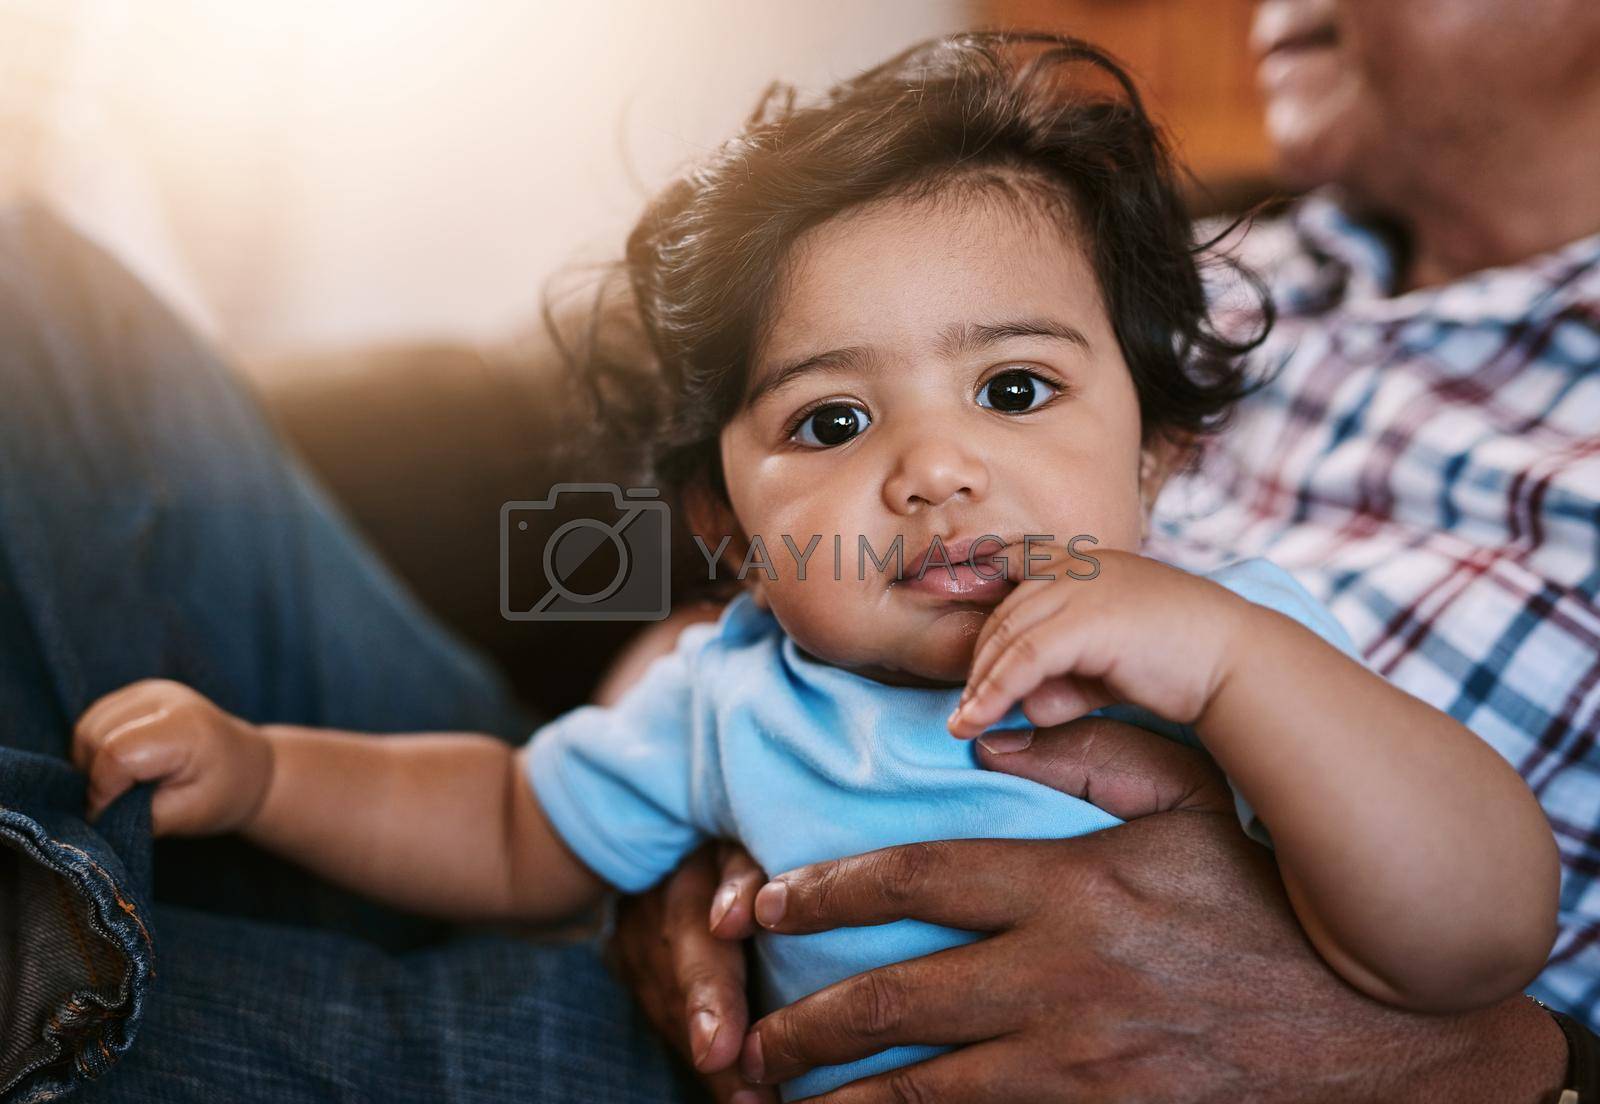 Royalty free image of Trying to figure out whats going on. Portrait of a cheerful little baby boy sitting on his dads lap while looking into the camera at home during the day. by YuriArcurs